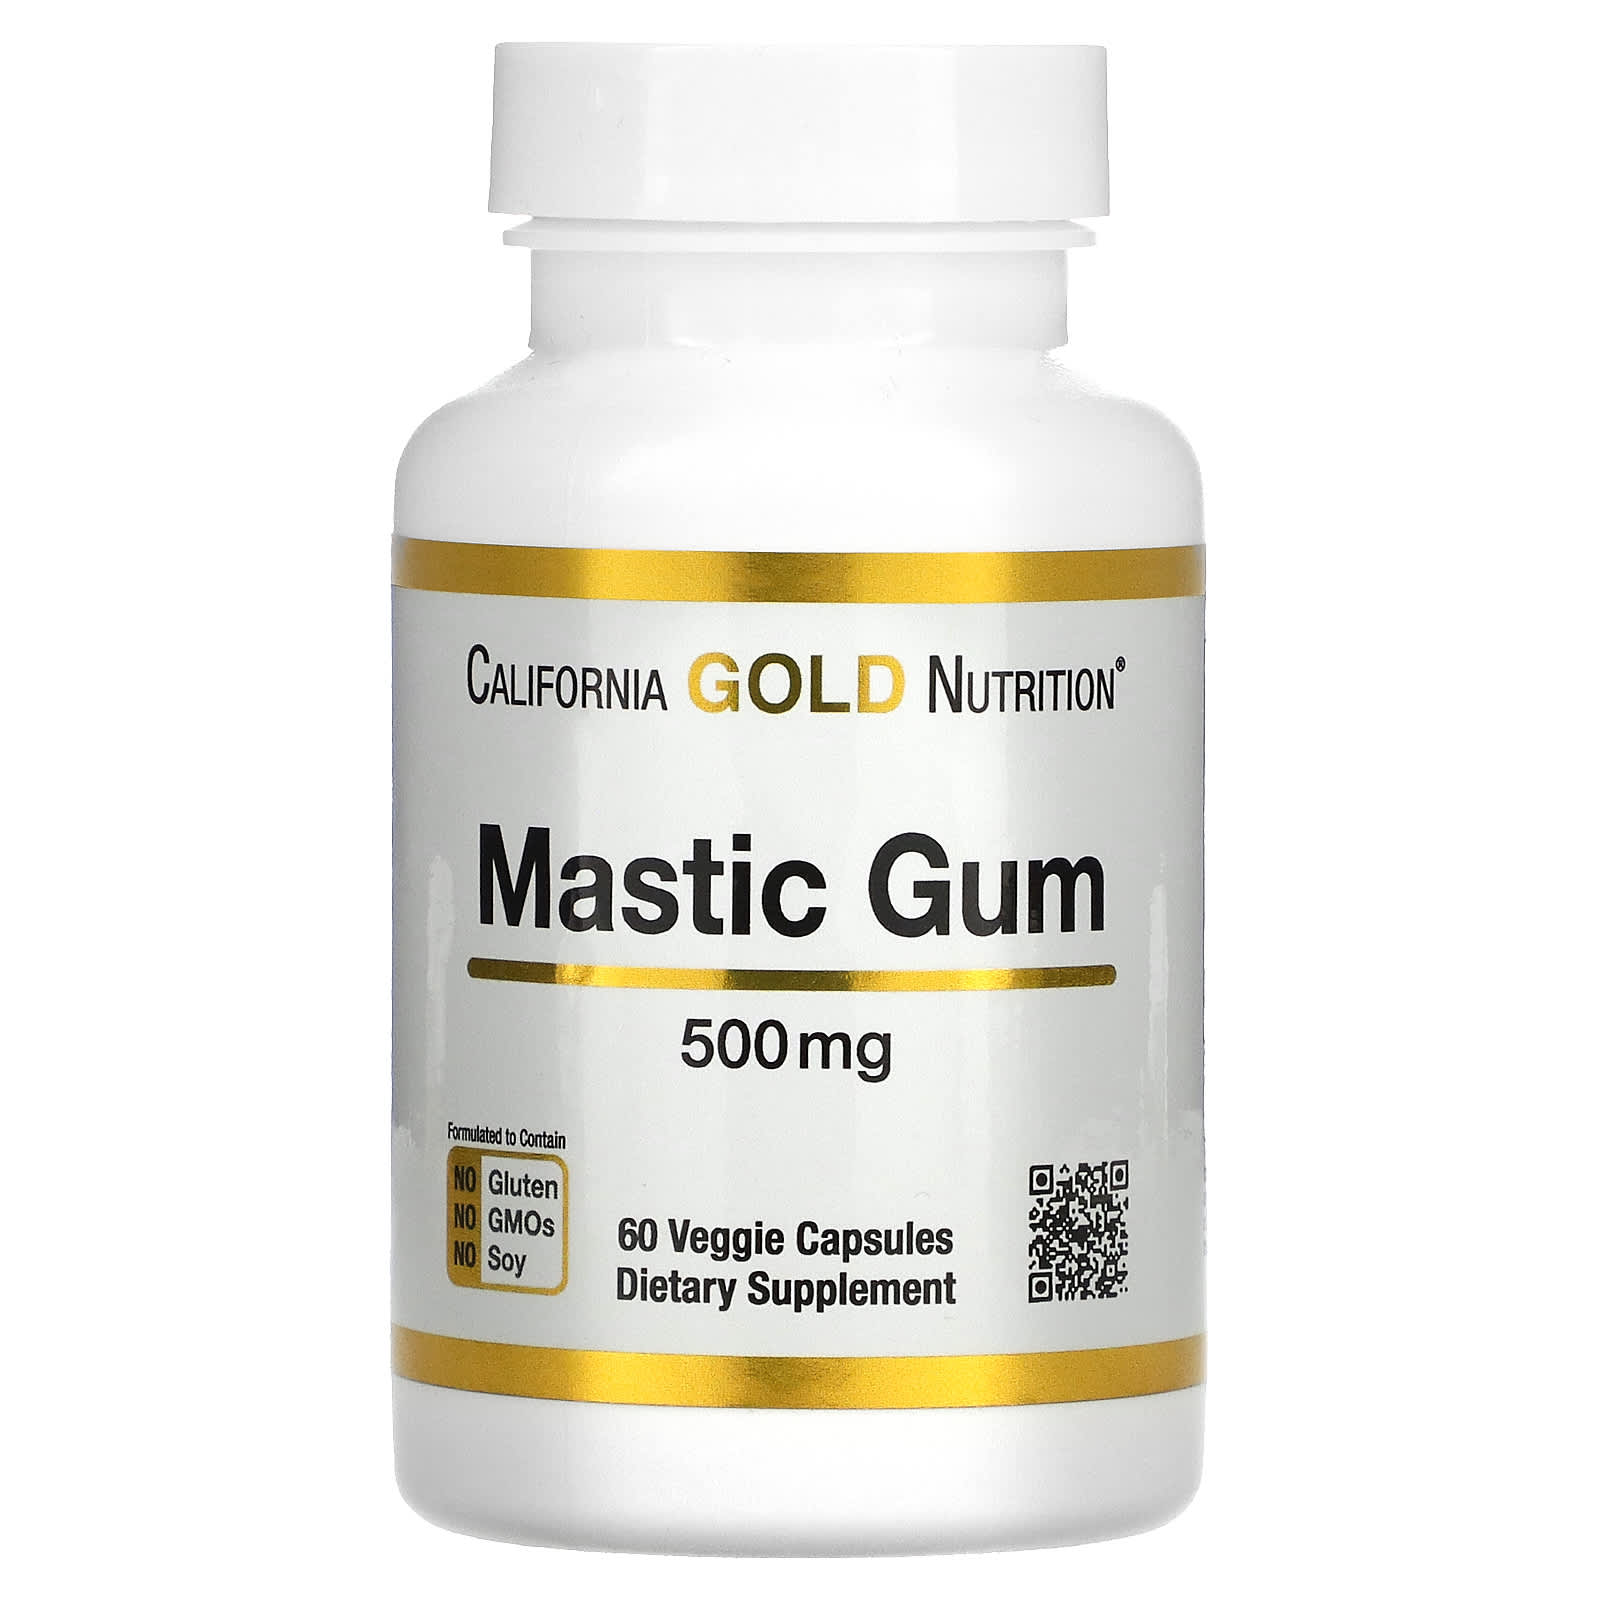 Have You Heard of Mastic Gum? Here Are 8 Health Benefits